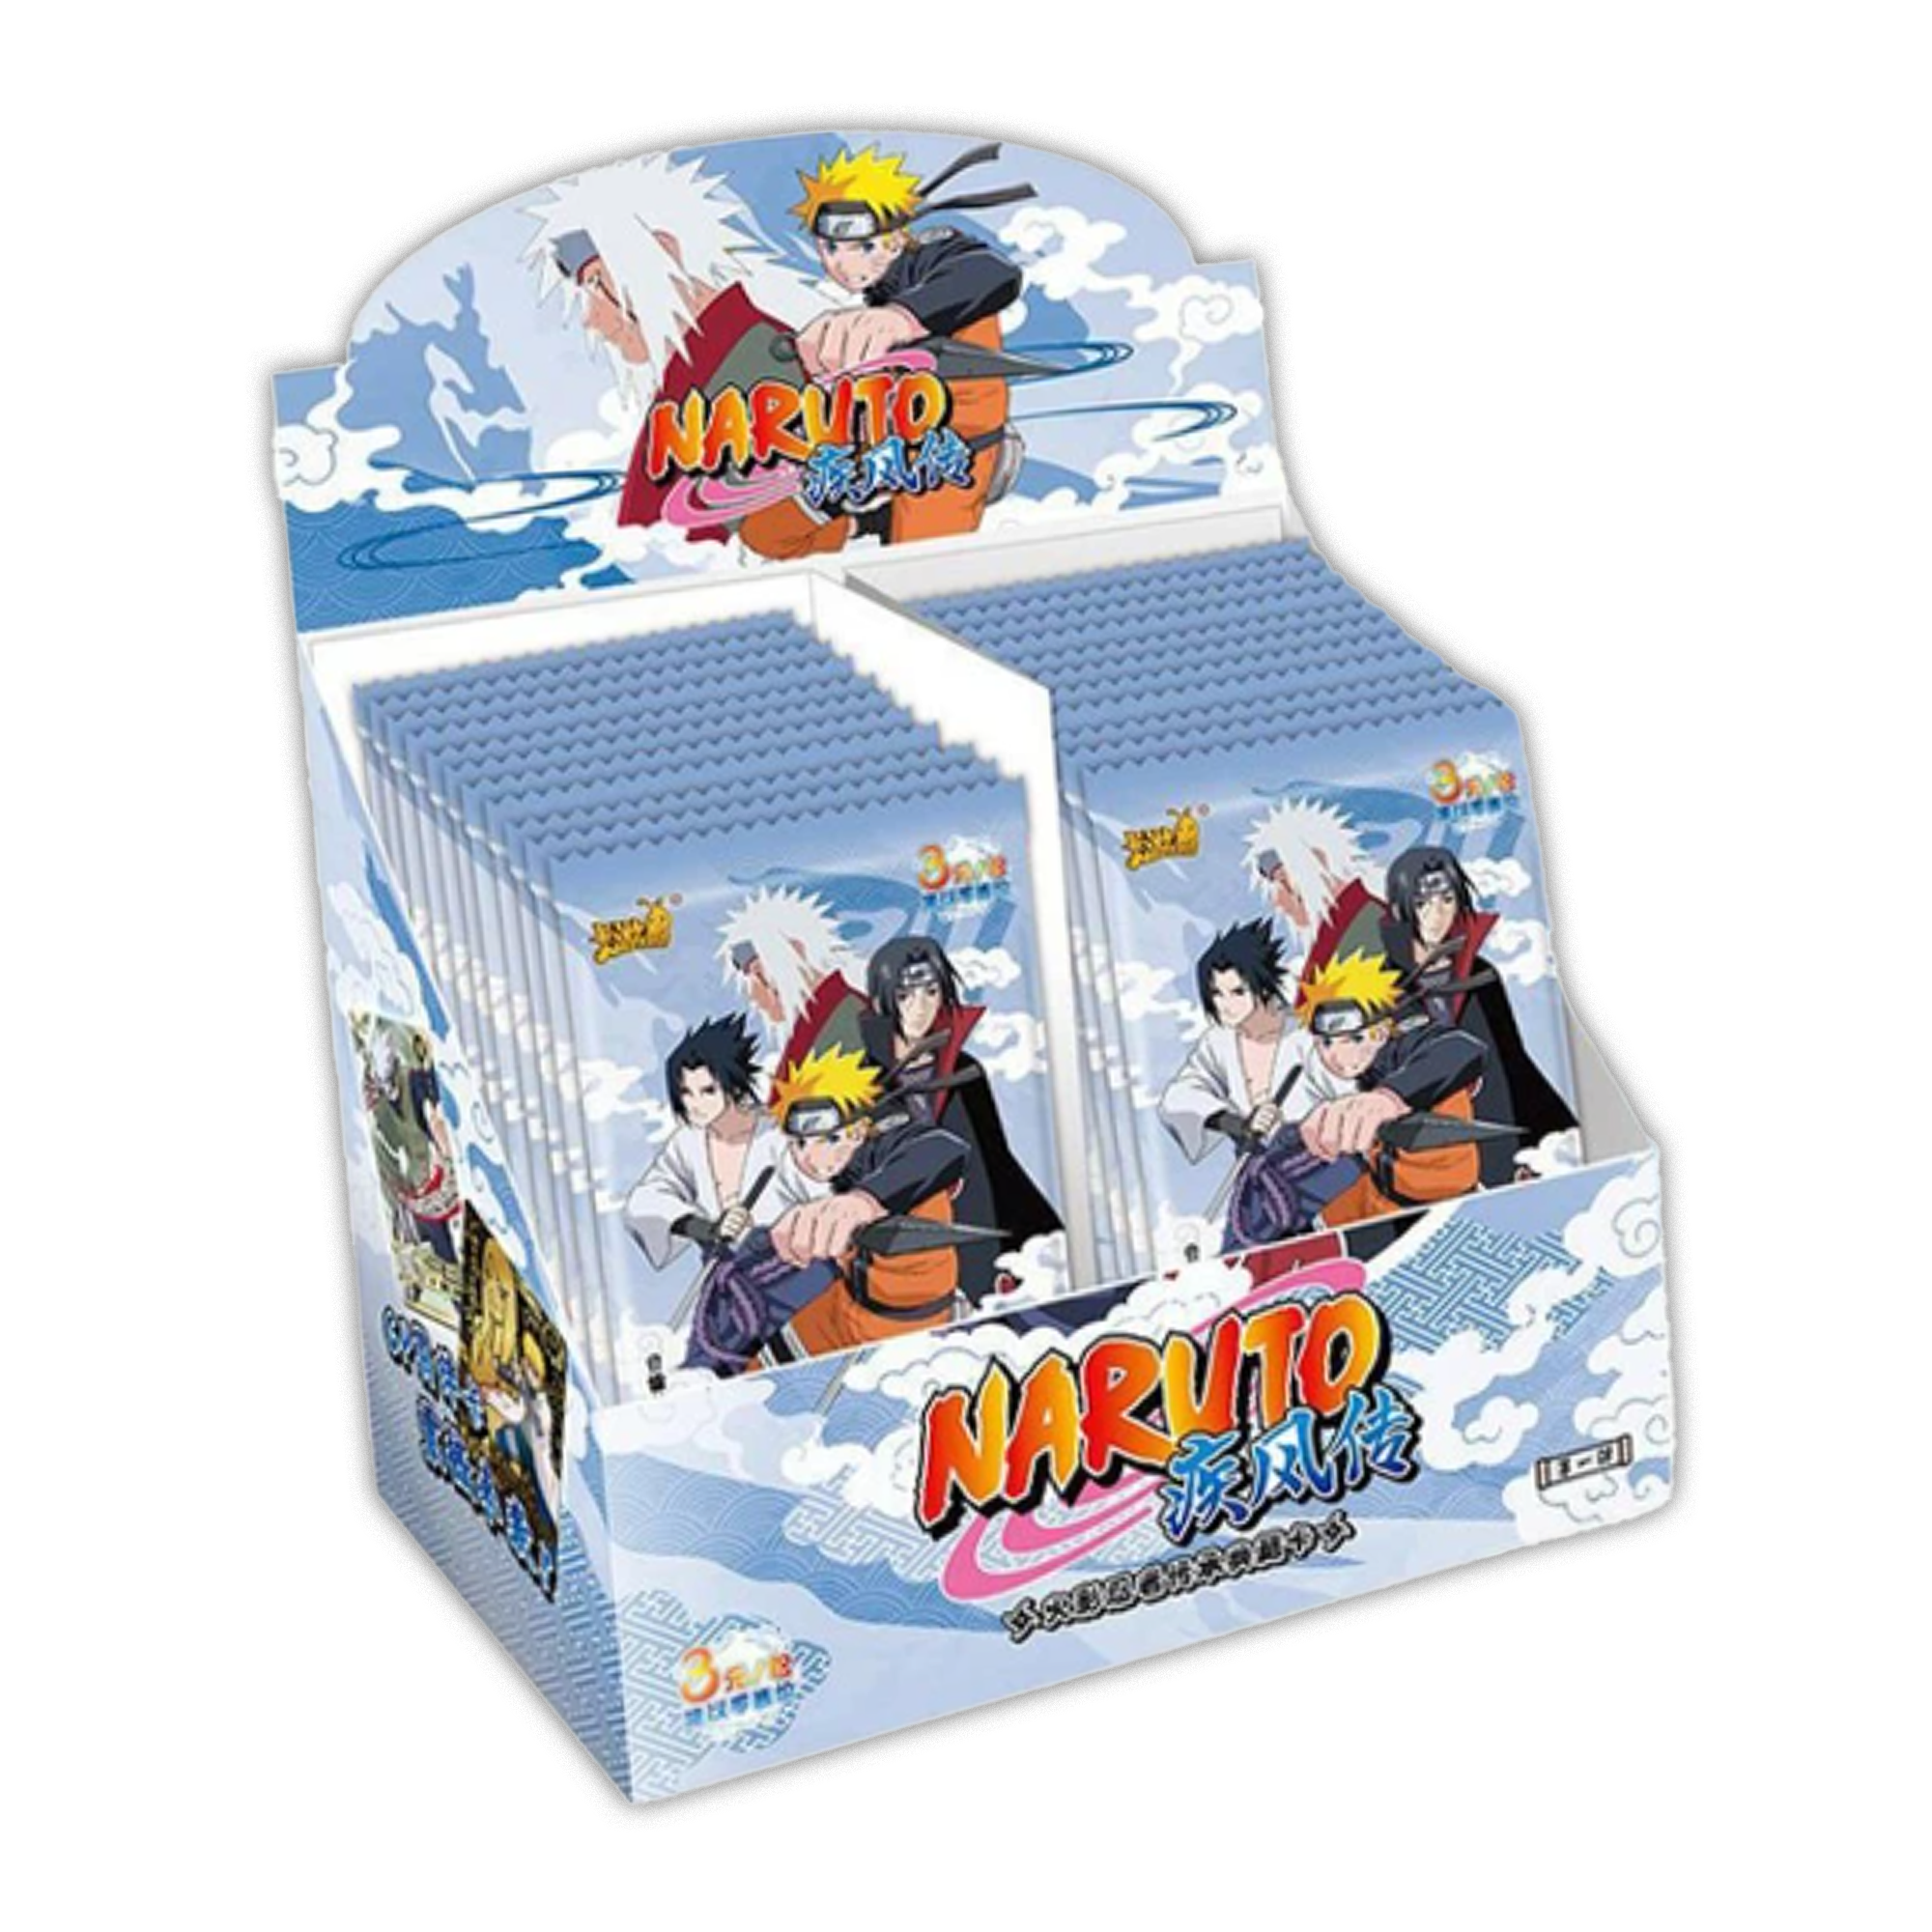 [SCELLE] Display 50 Boosters Naruto Kayou - Wave 1 Tiers 2.5 [CN]